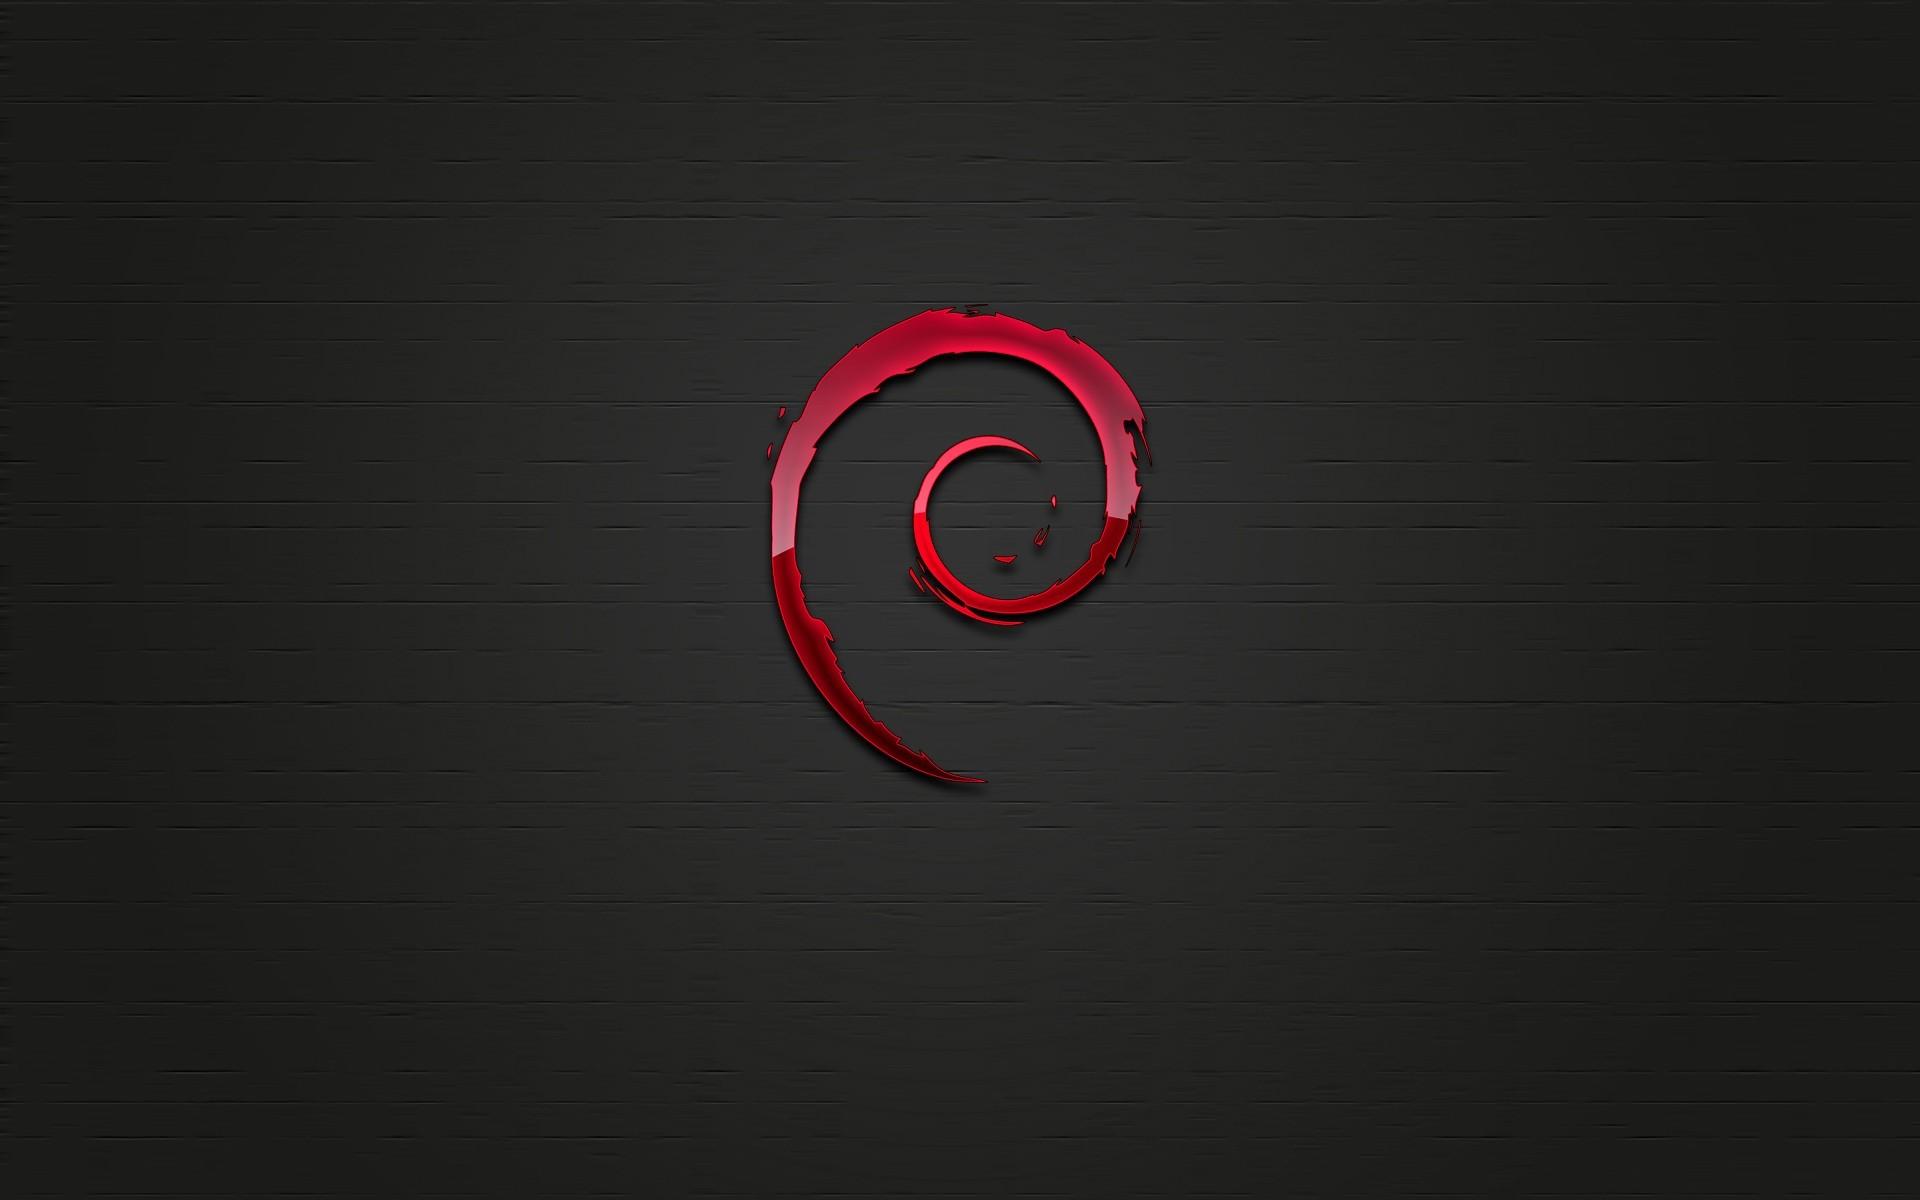 kali linux download for android mobile